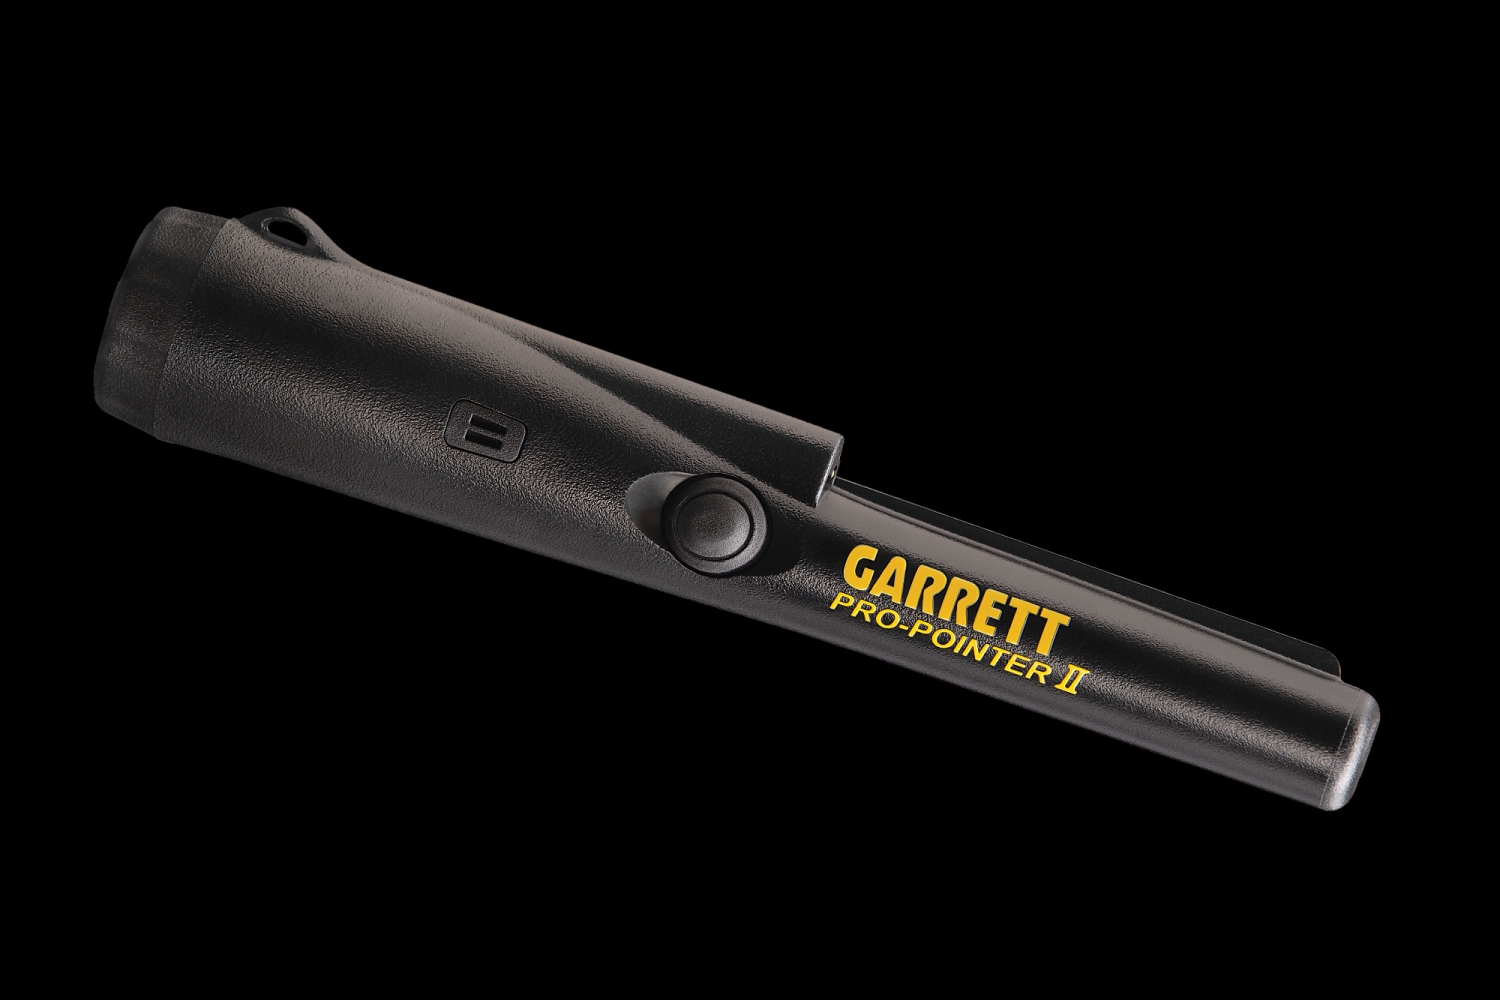 GARRETT PRO POINTER AT STAINLESS STEEL ATTACHMENT SECURITY RING 